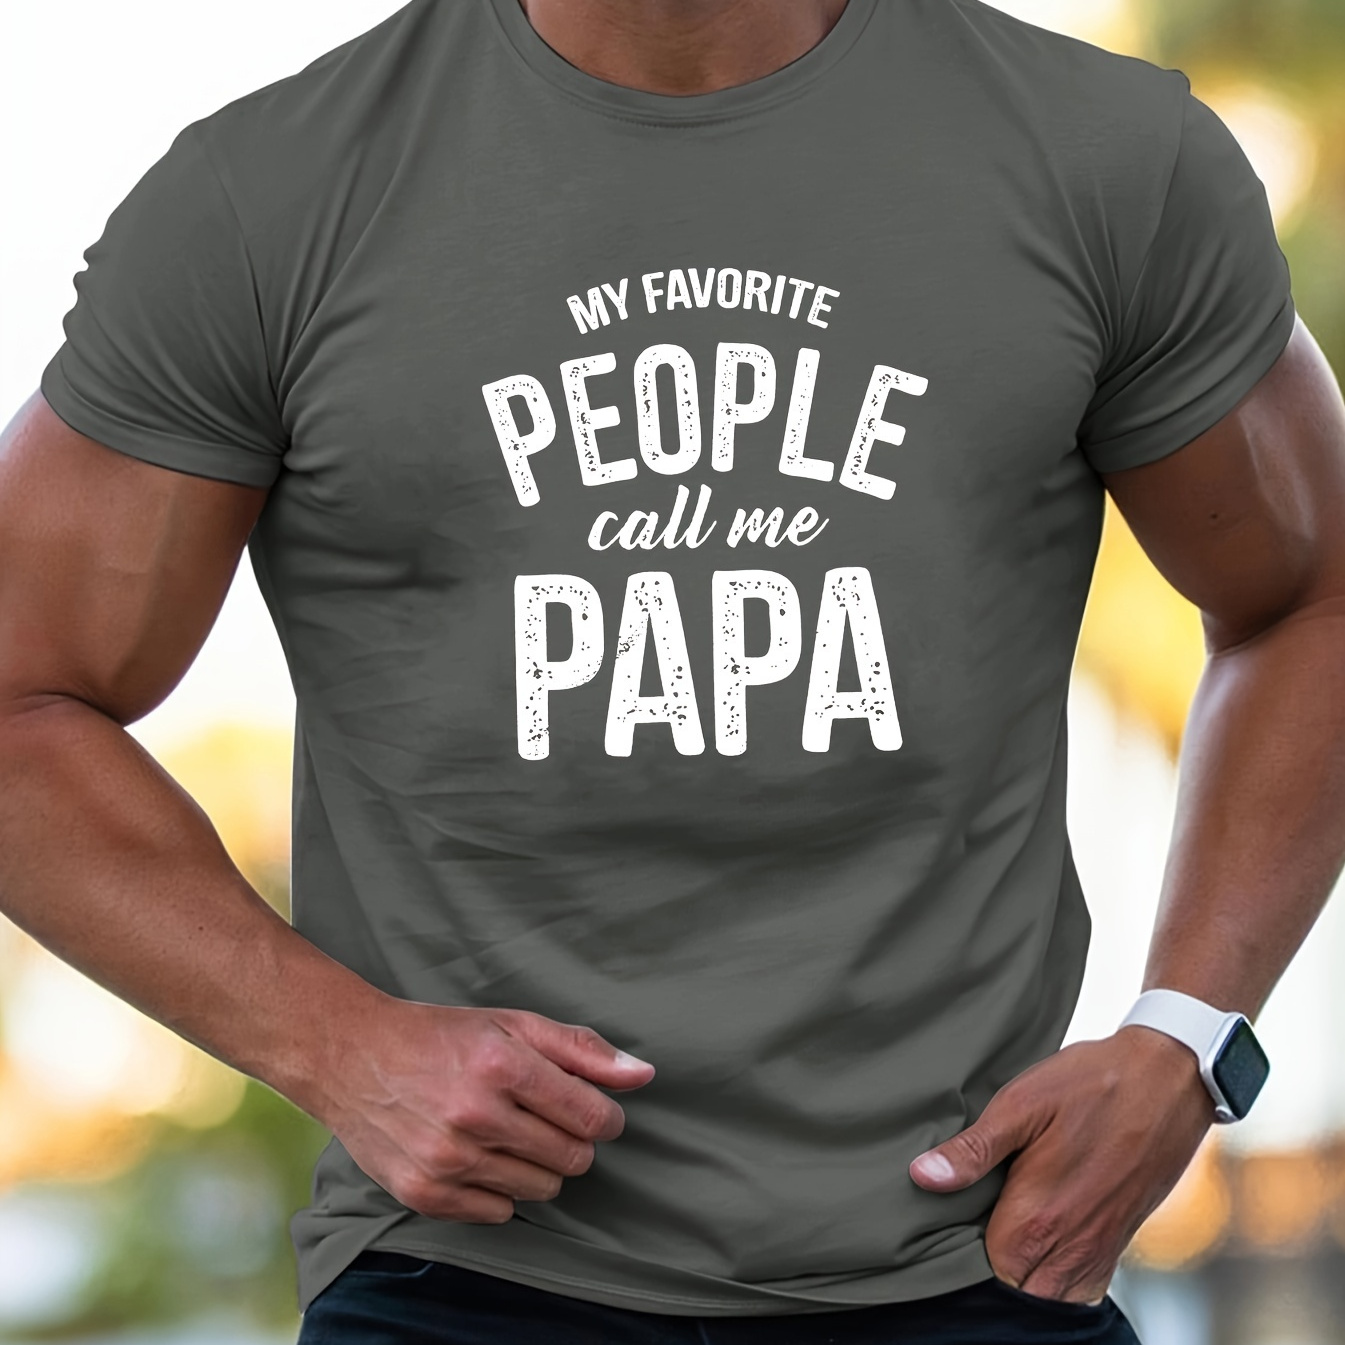 

My Favorite People Call Me Papa Print Tees For Men, Casual Quick Drying Breathable T-shirt, Short Sleeve T-shirt For Running Training